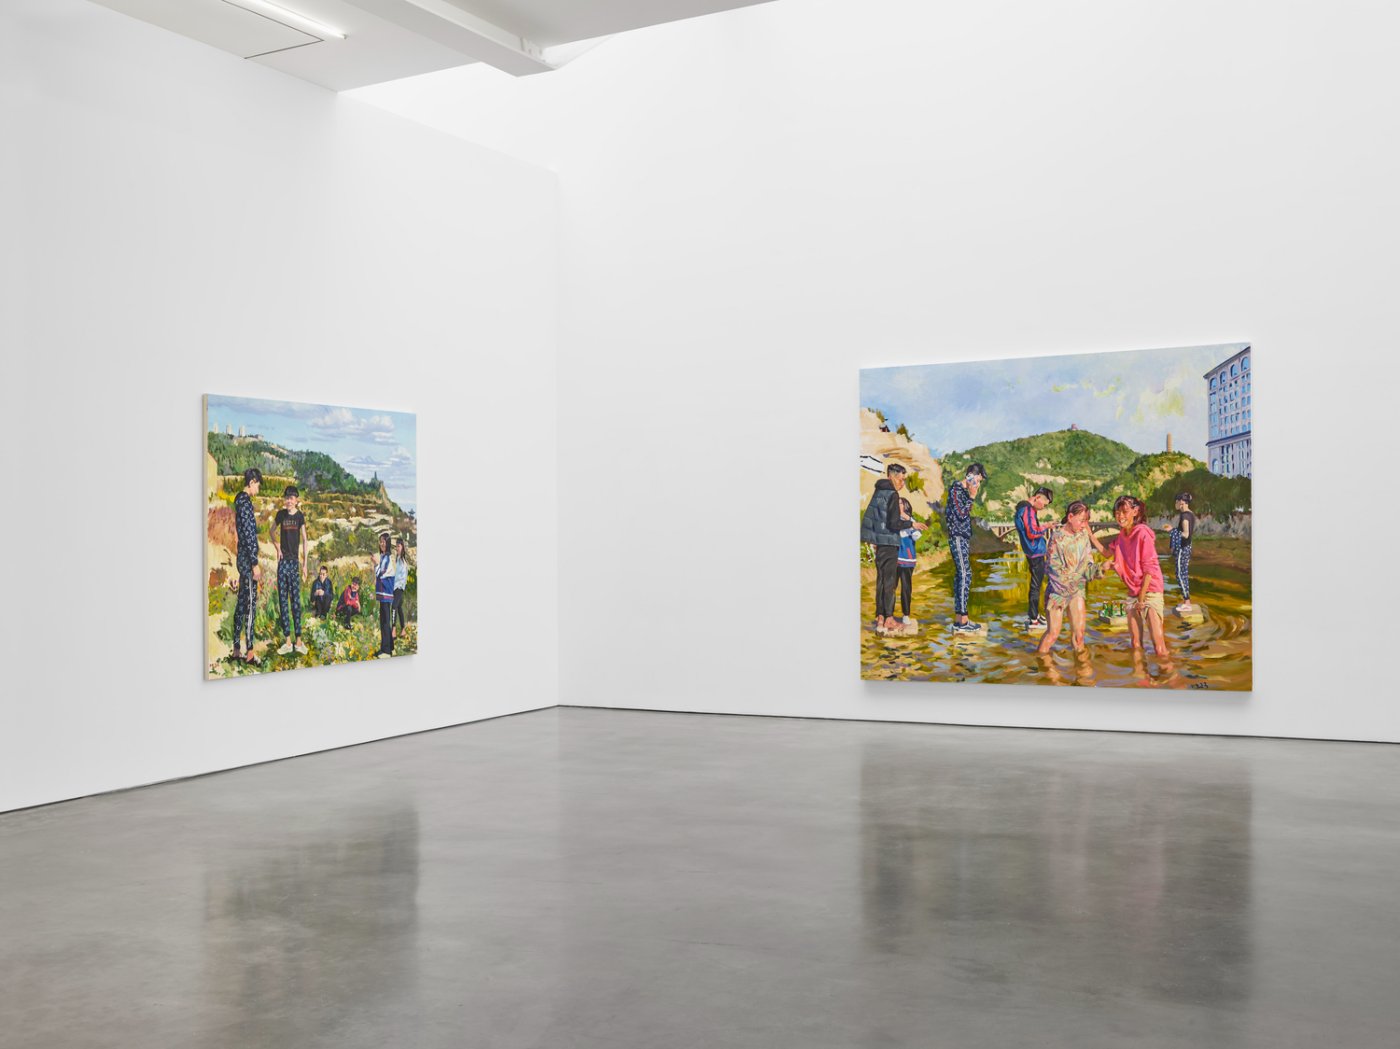 Installation image for Liu Xiaodong: Shaanbei, at Lisson Gallery